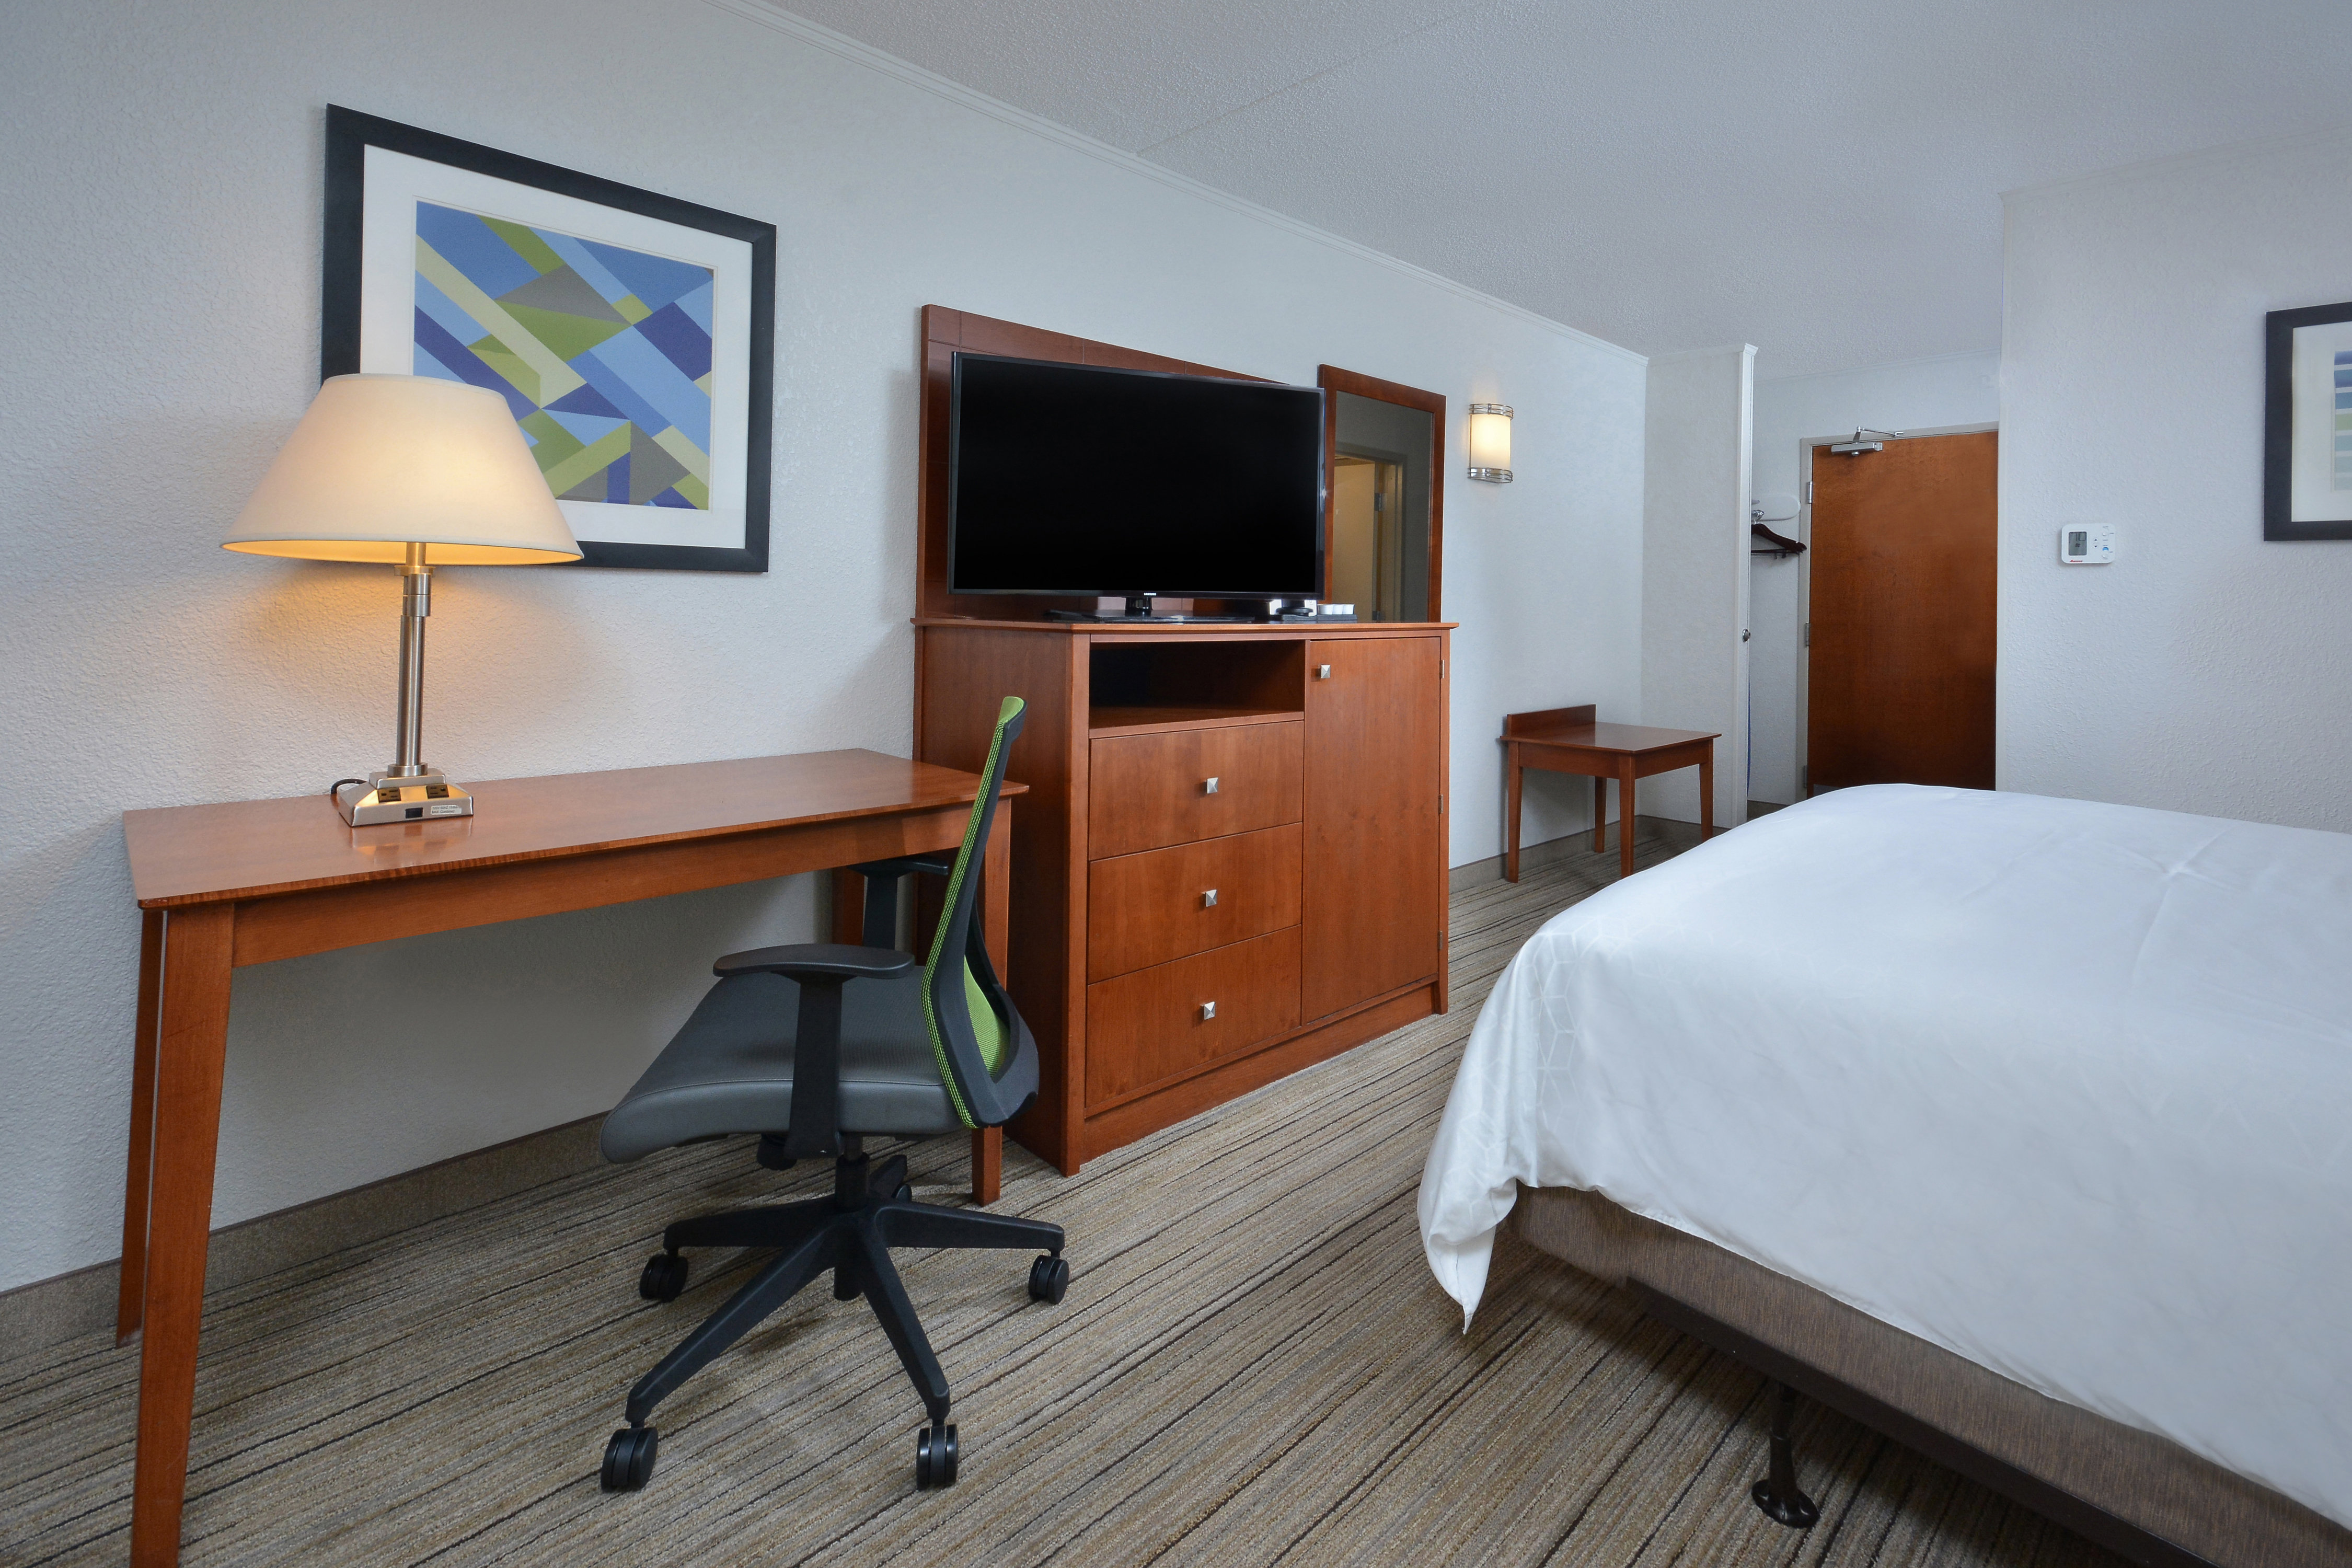 Expect a consistent quality of stay at our Lynchburg, VA hotel.